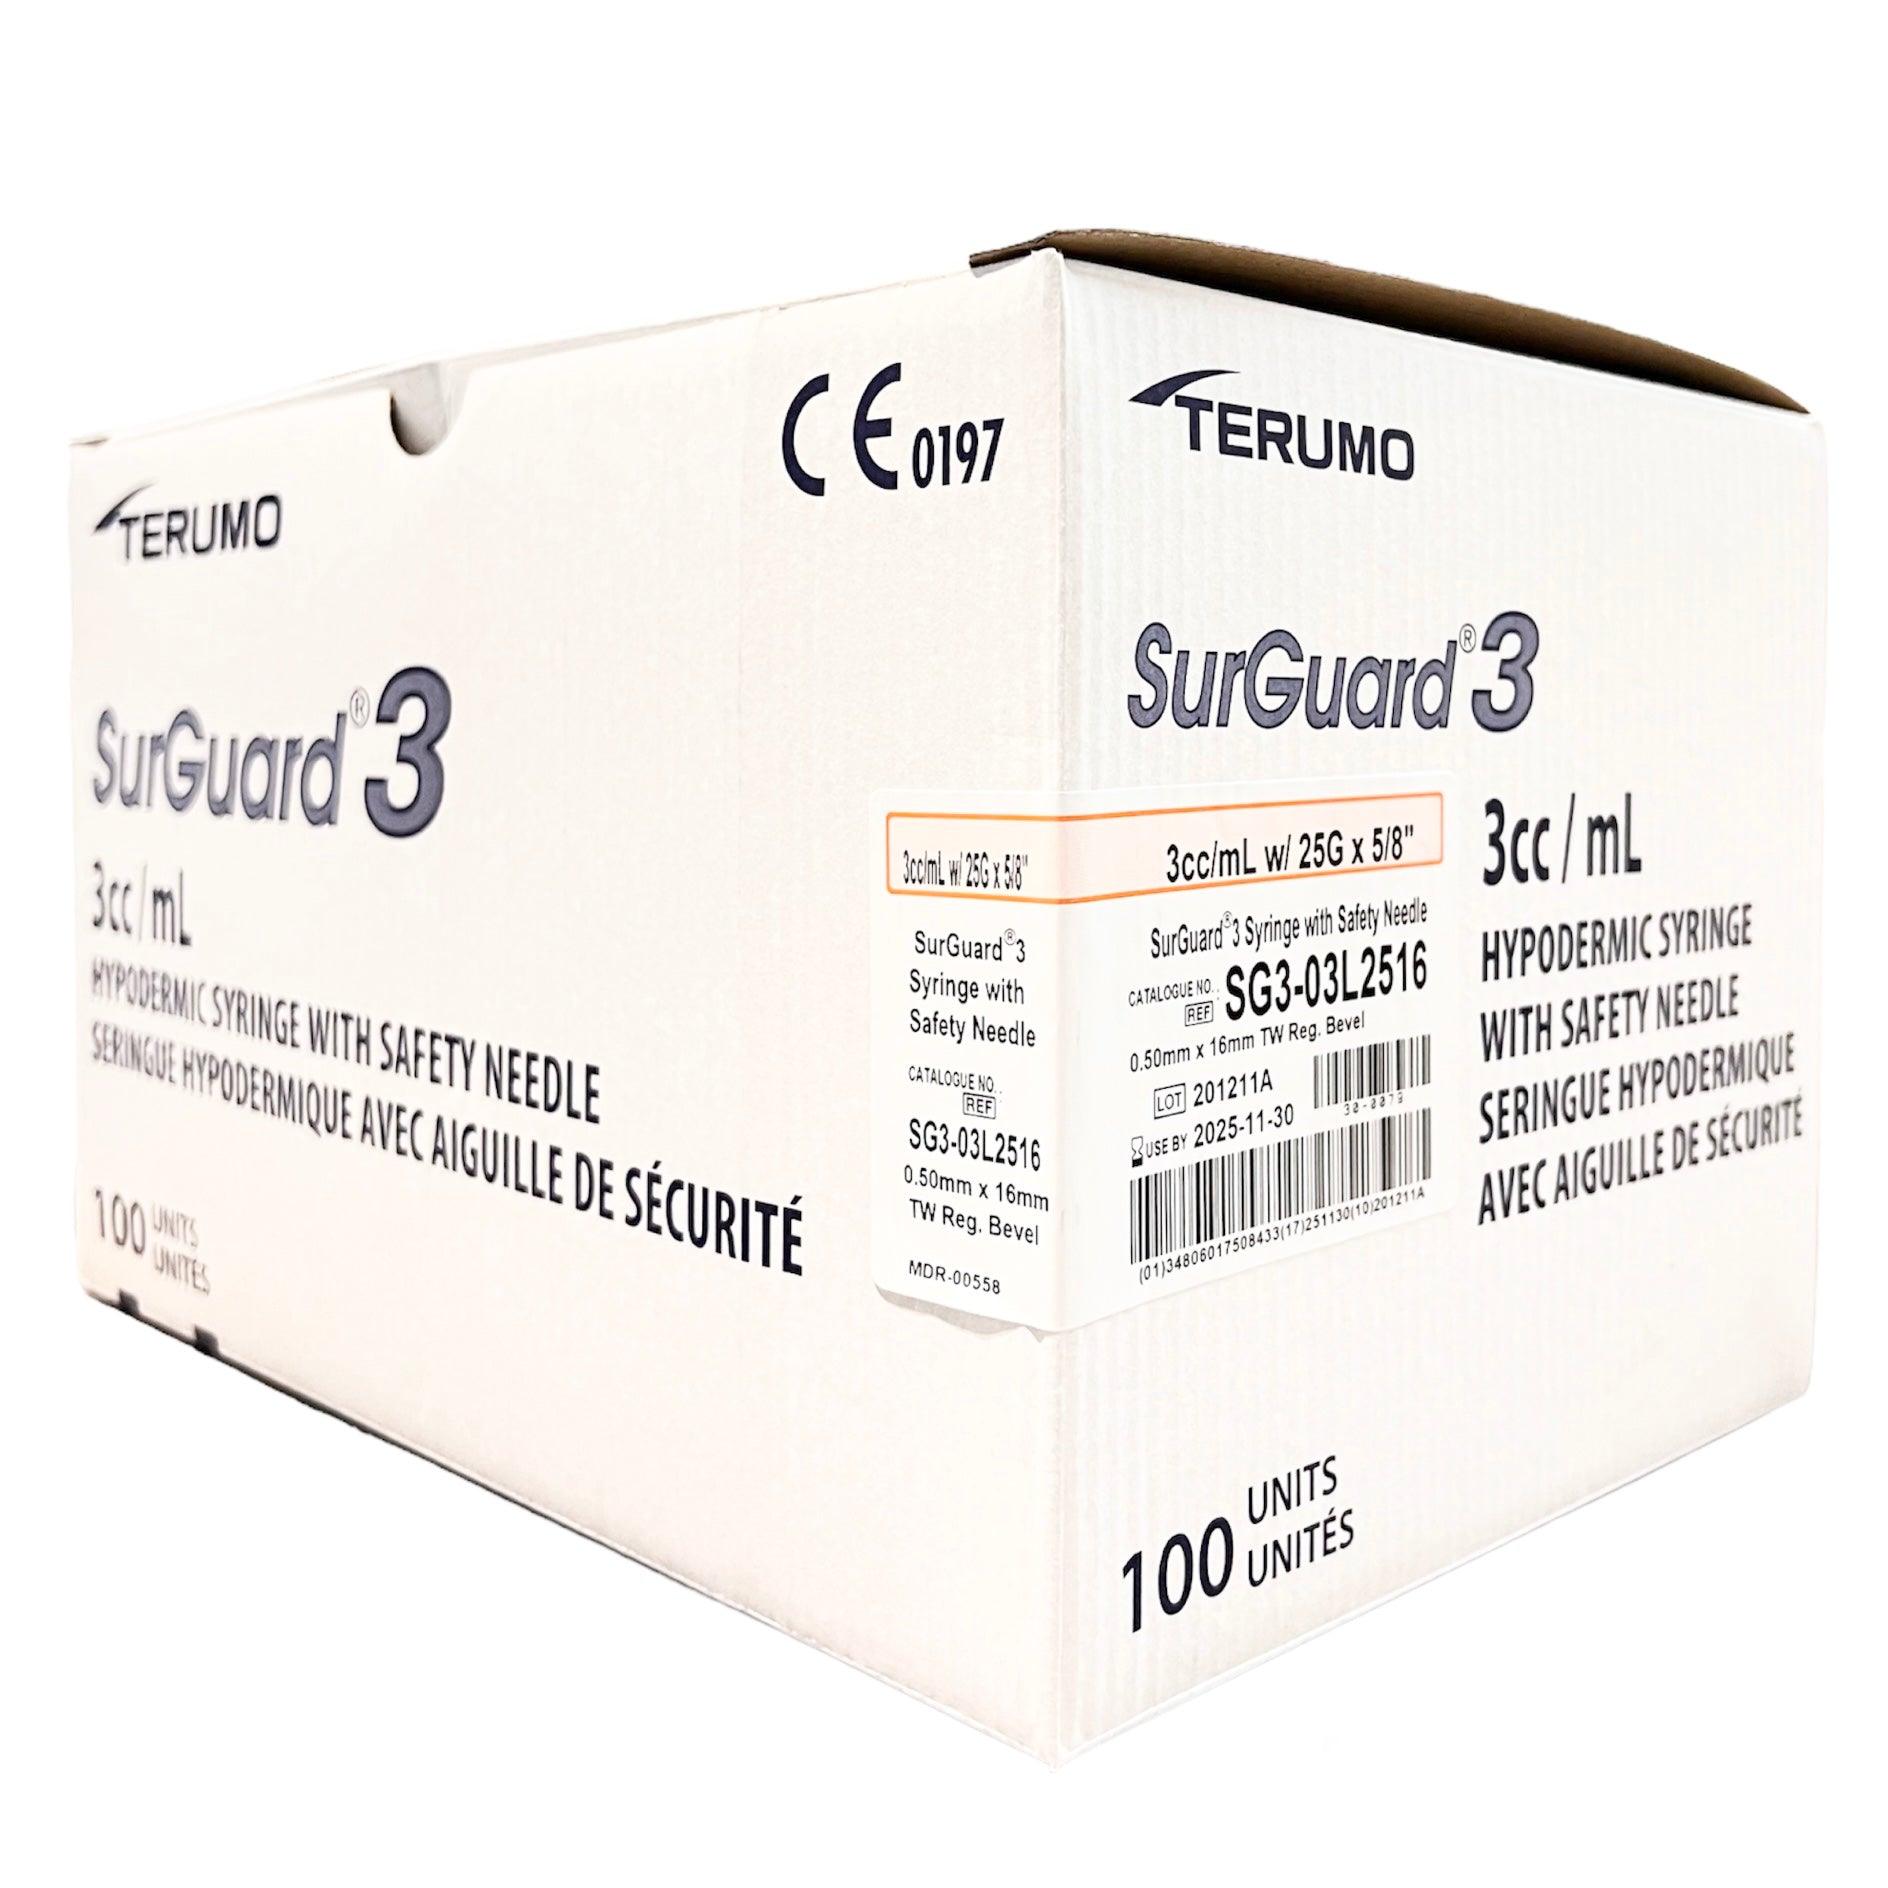 3 mL | 25G x 5/8" - Terumo SG3-03L2516 Hypodermic Syringes with Safety Needle | SurGuard 3 | 100 per Box